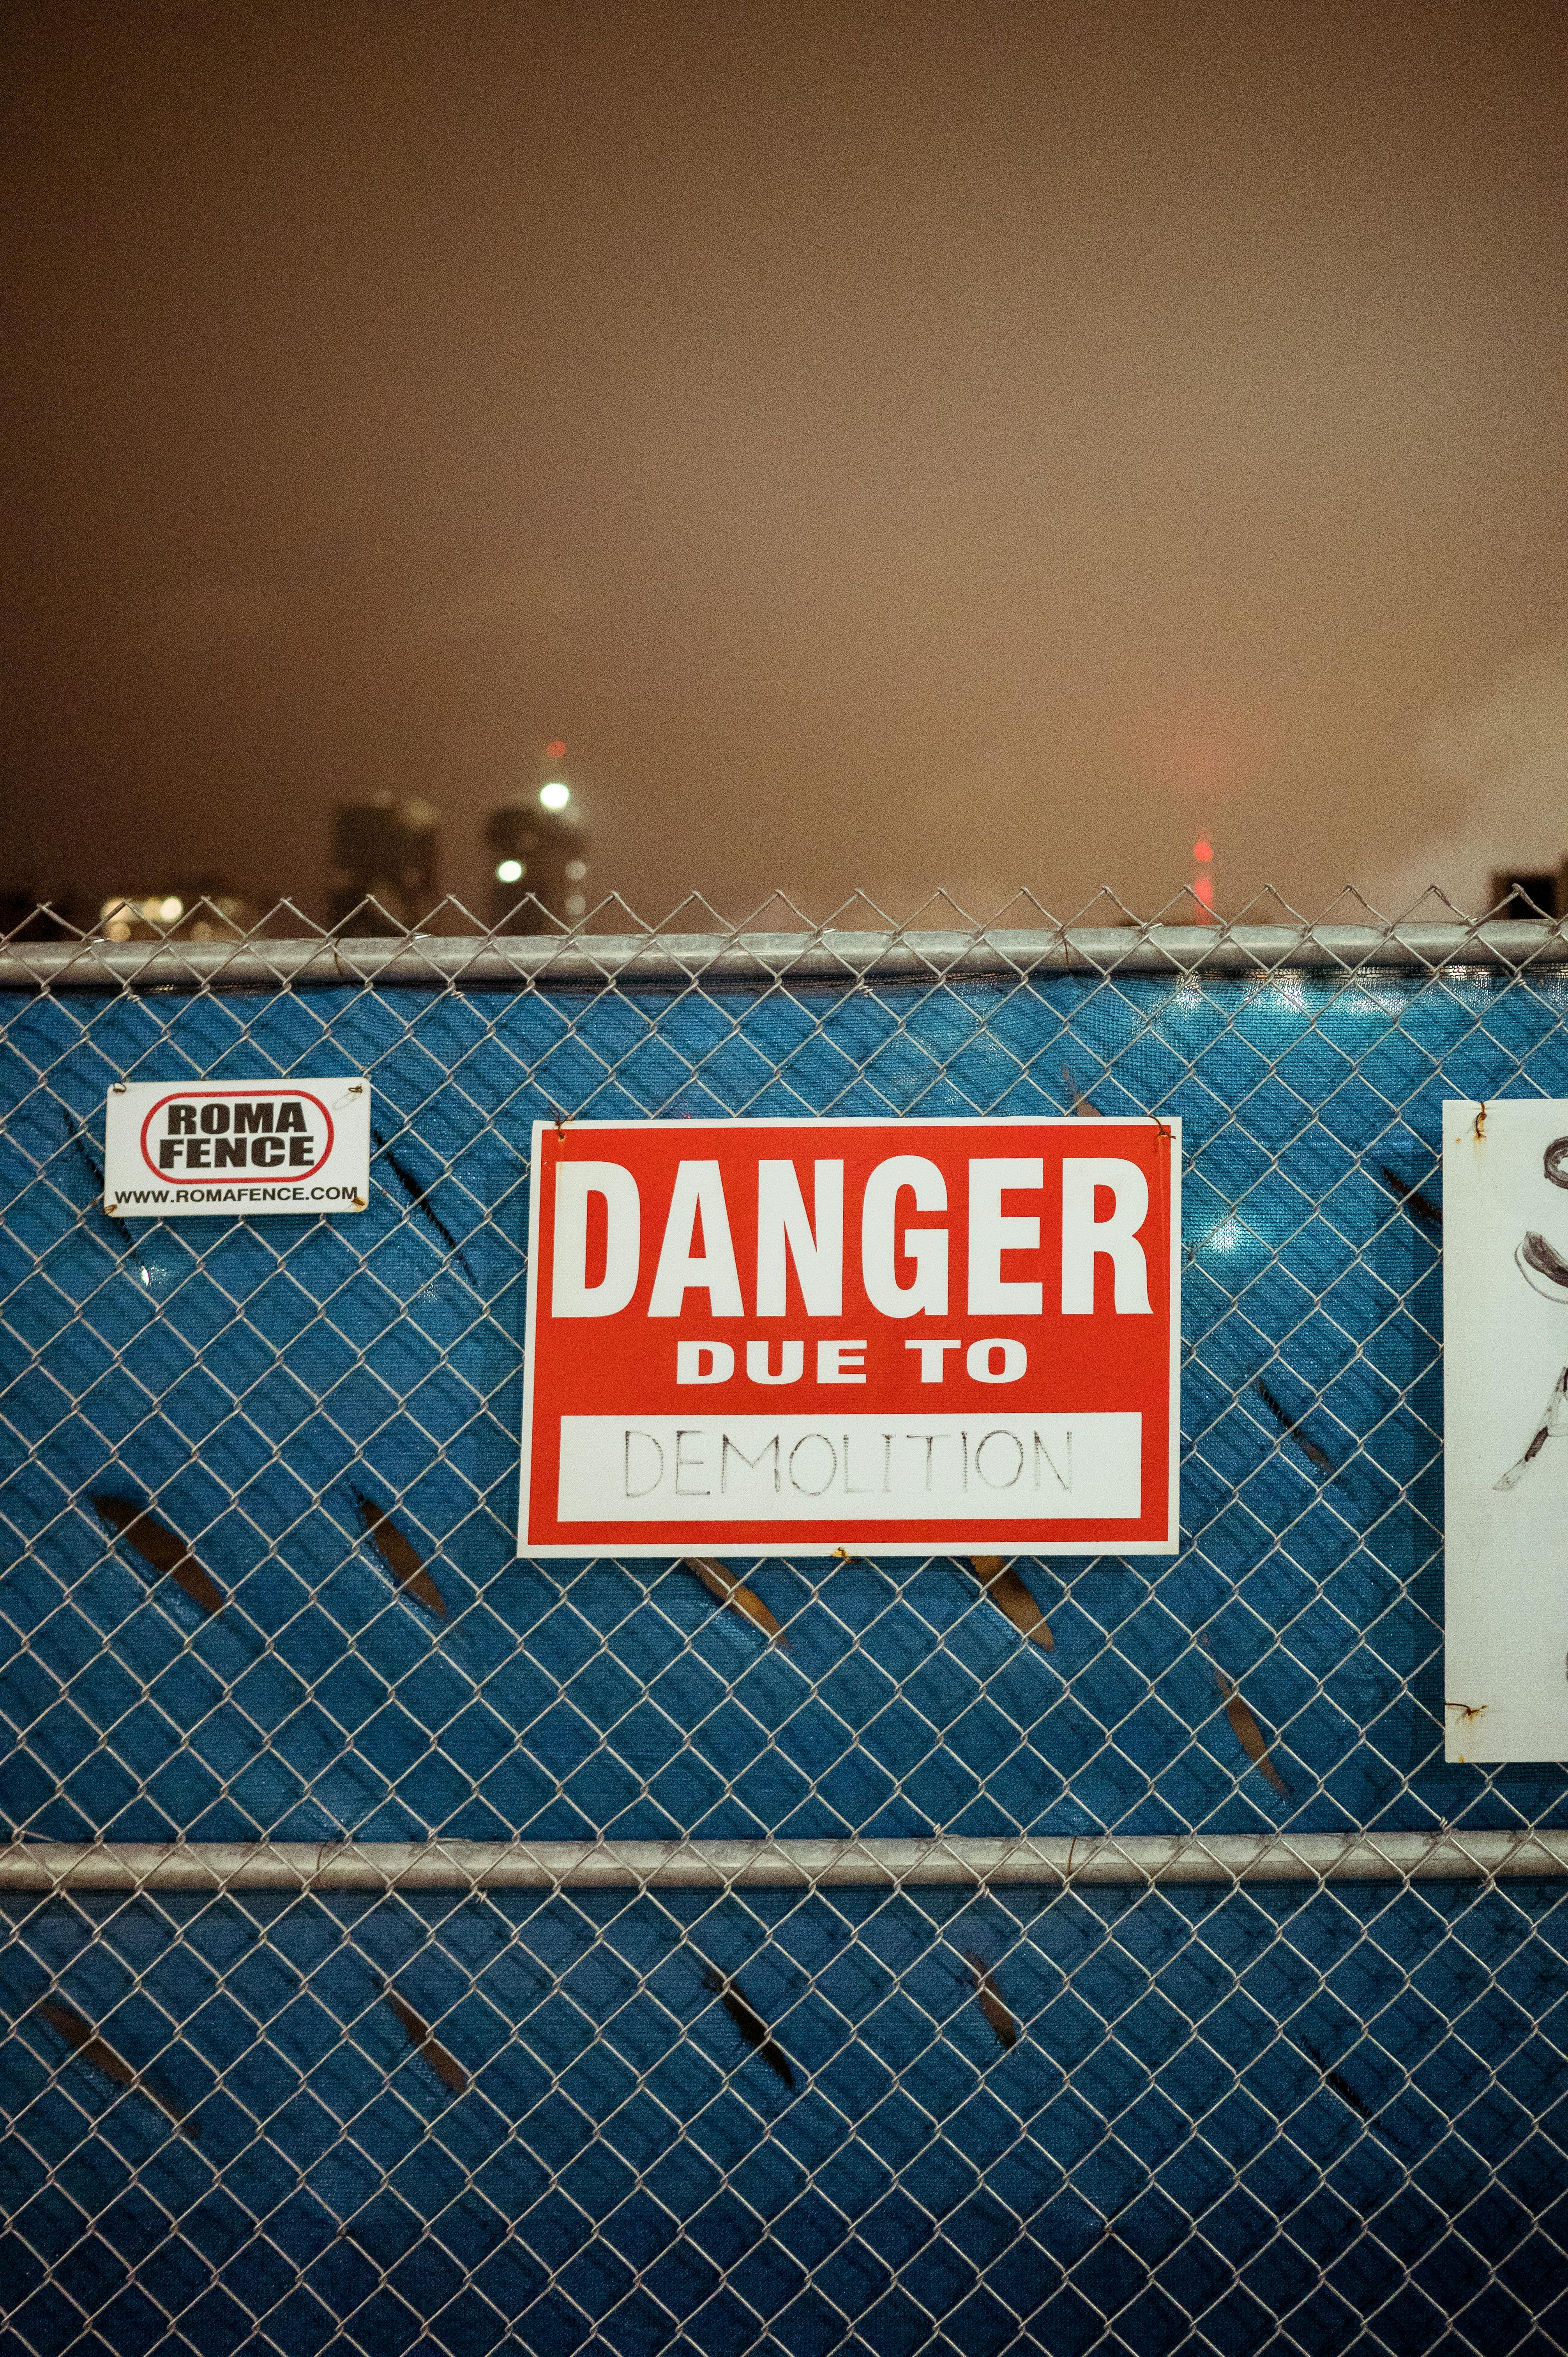 close up of the danger signage on the metal fence